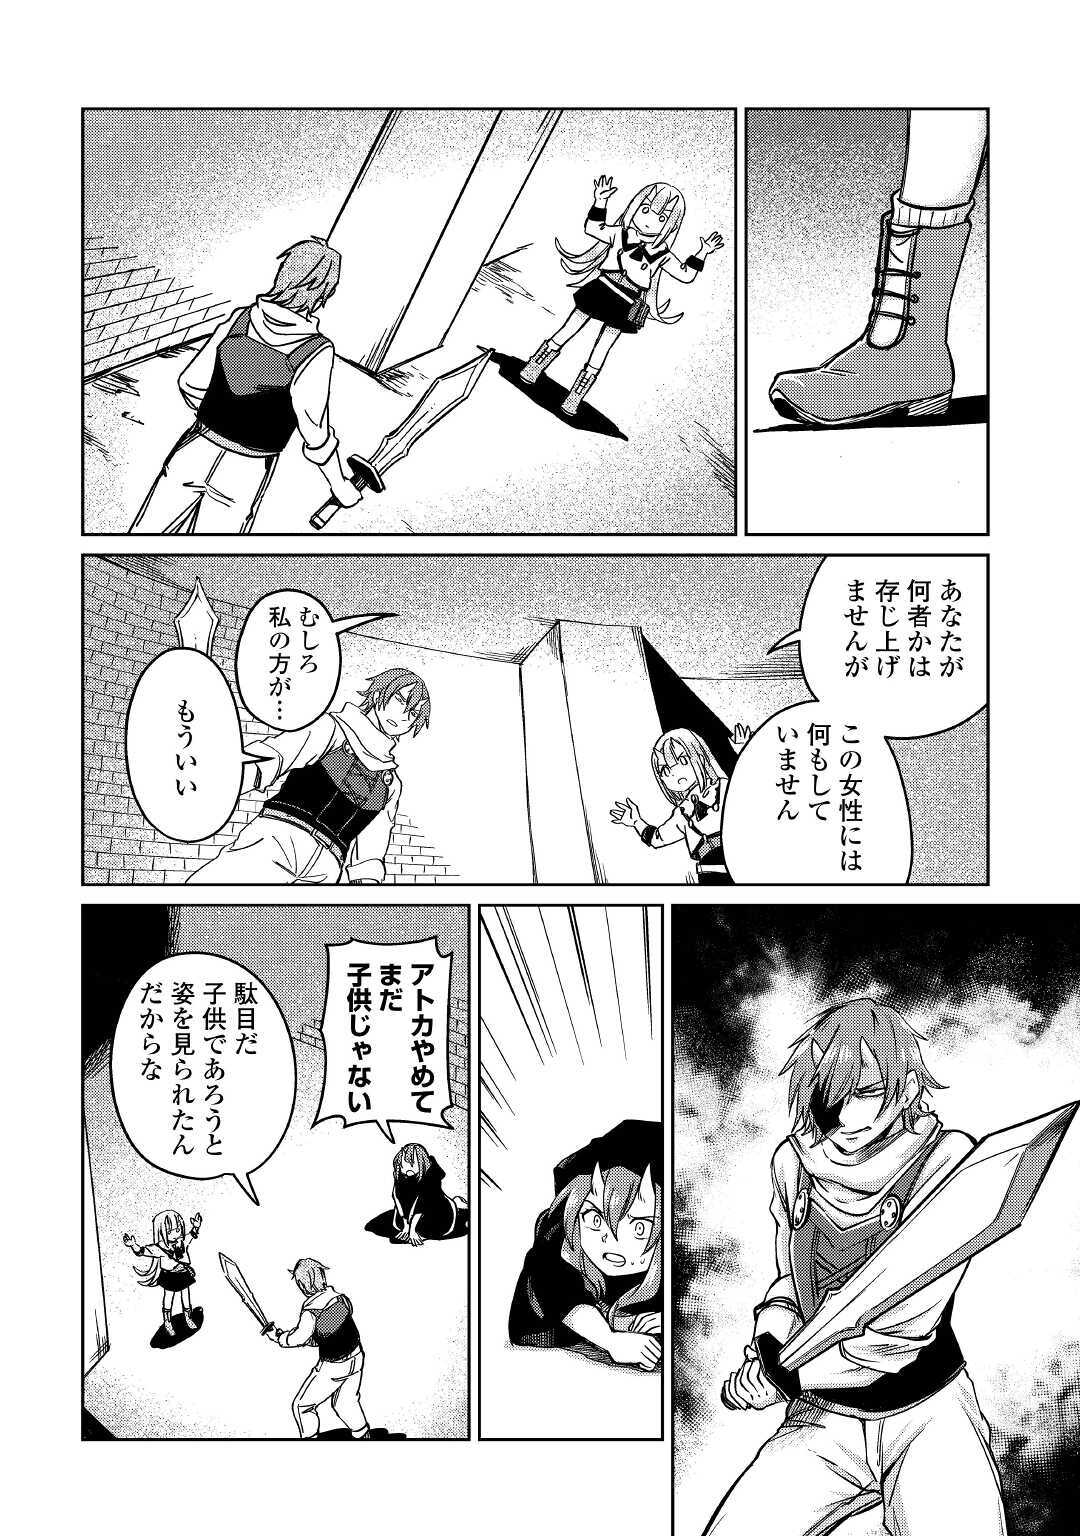 The Former Structural Researcher’s Story of Otherworldly Adventure 第25話 - Page 12